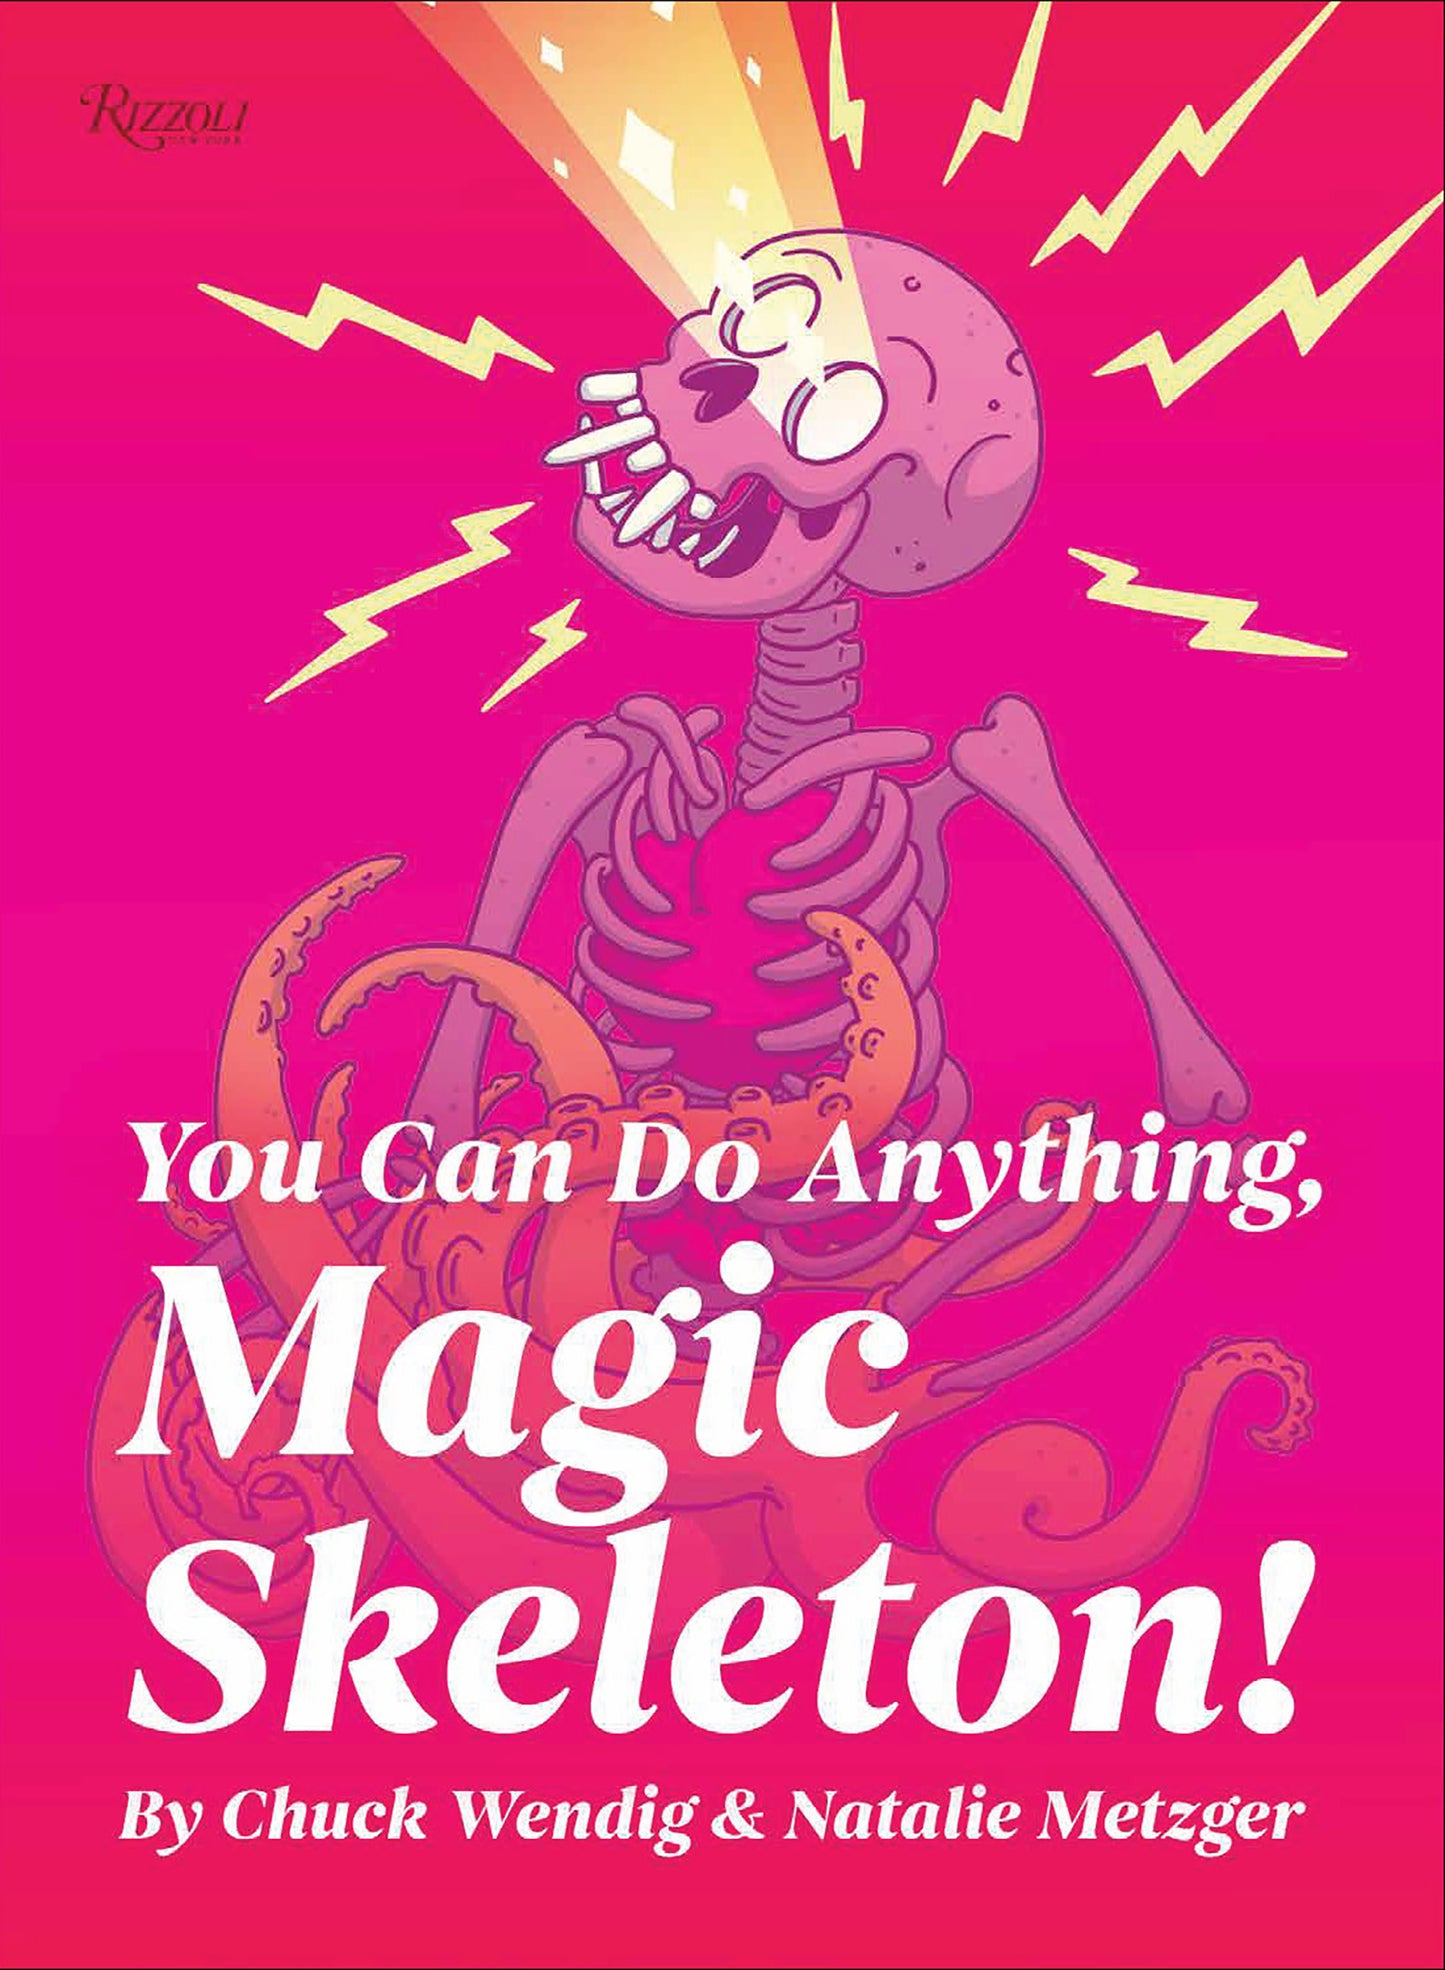 You Can Do Anything, Magic Skeleton!